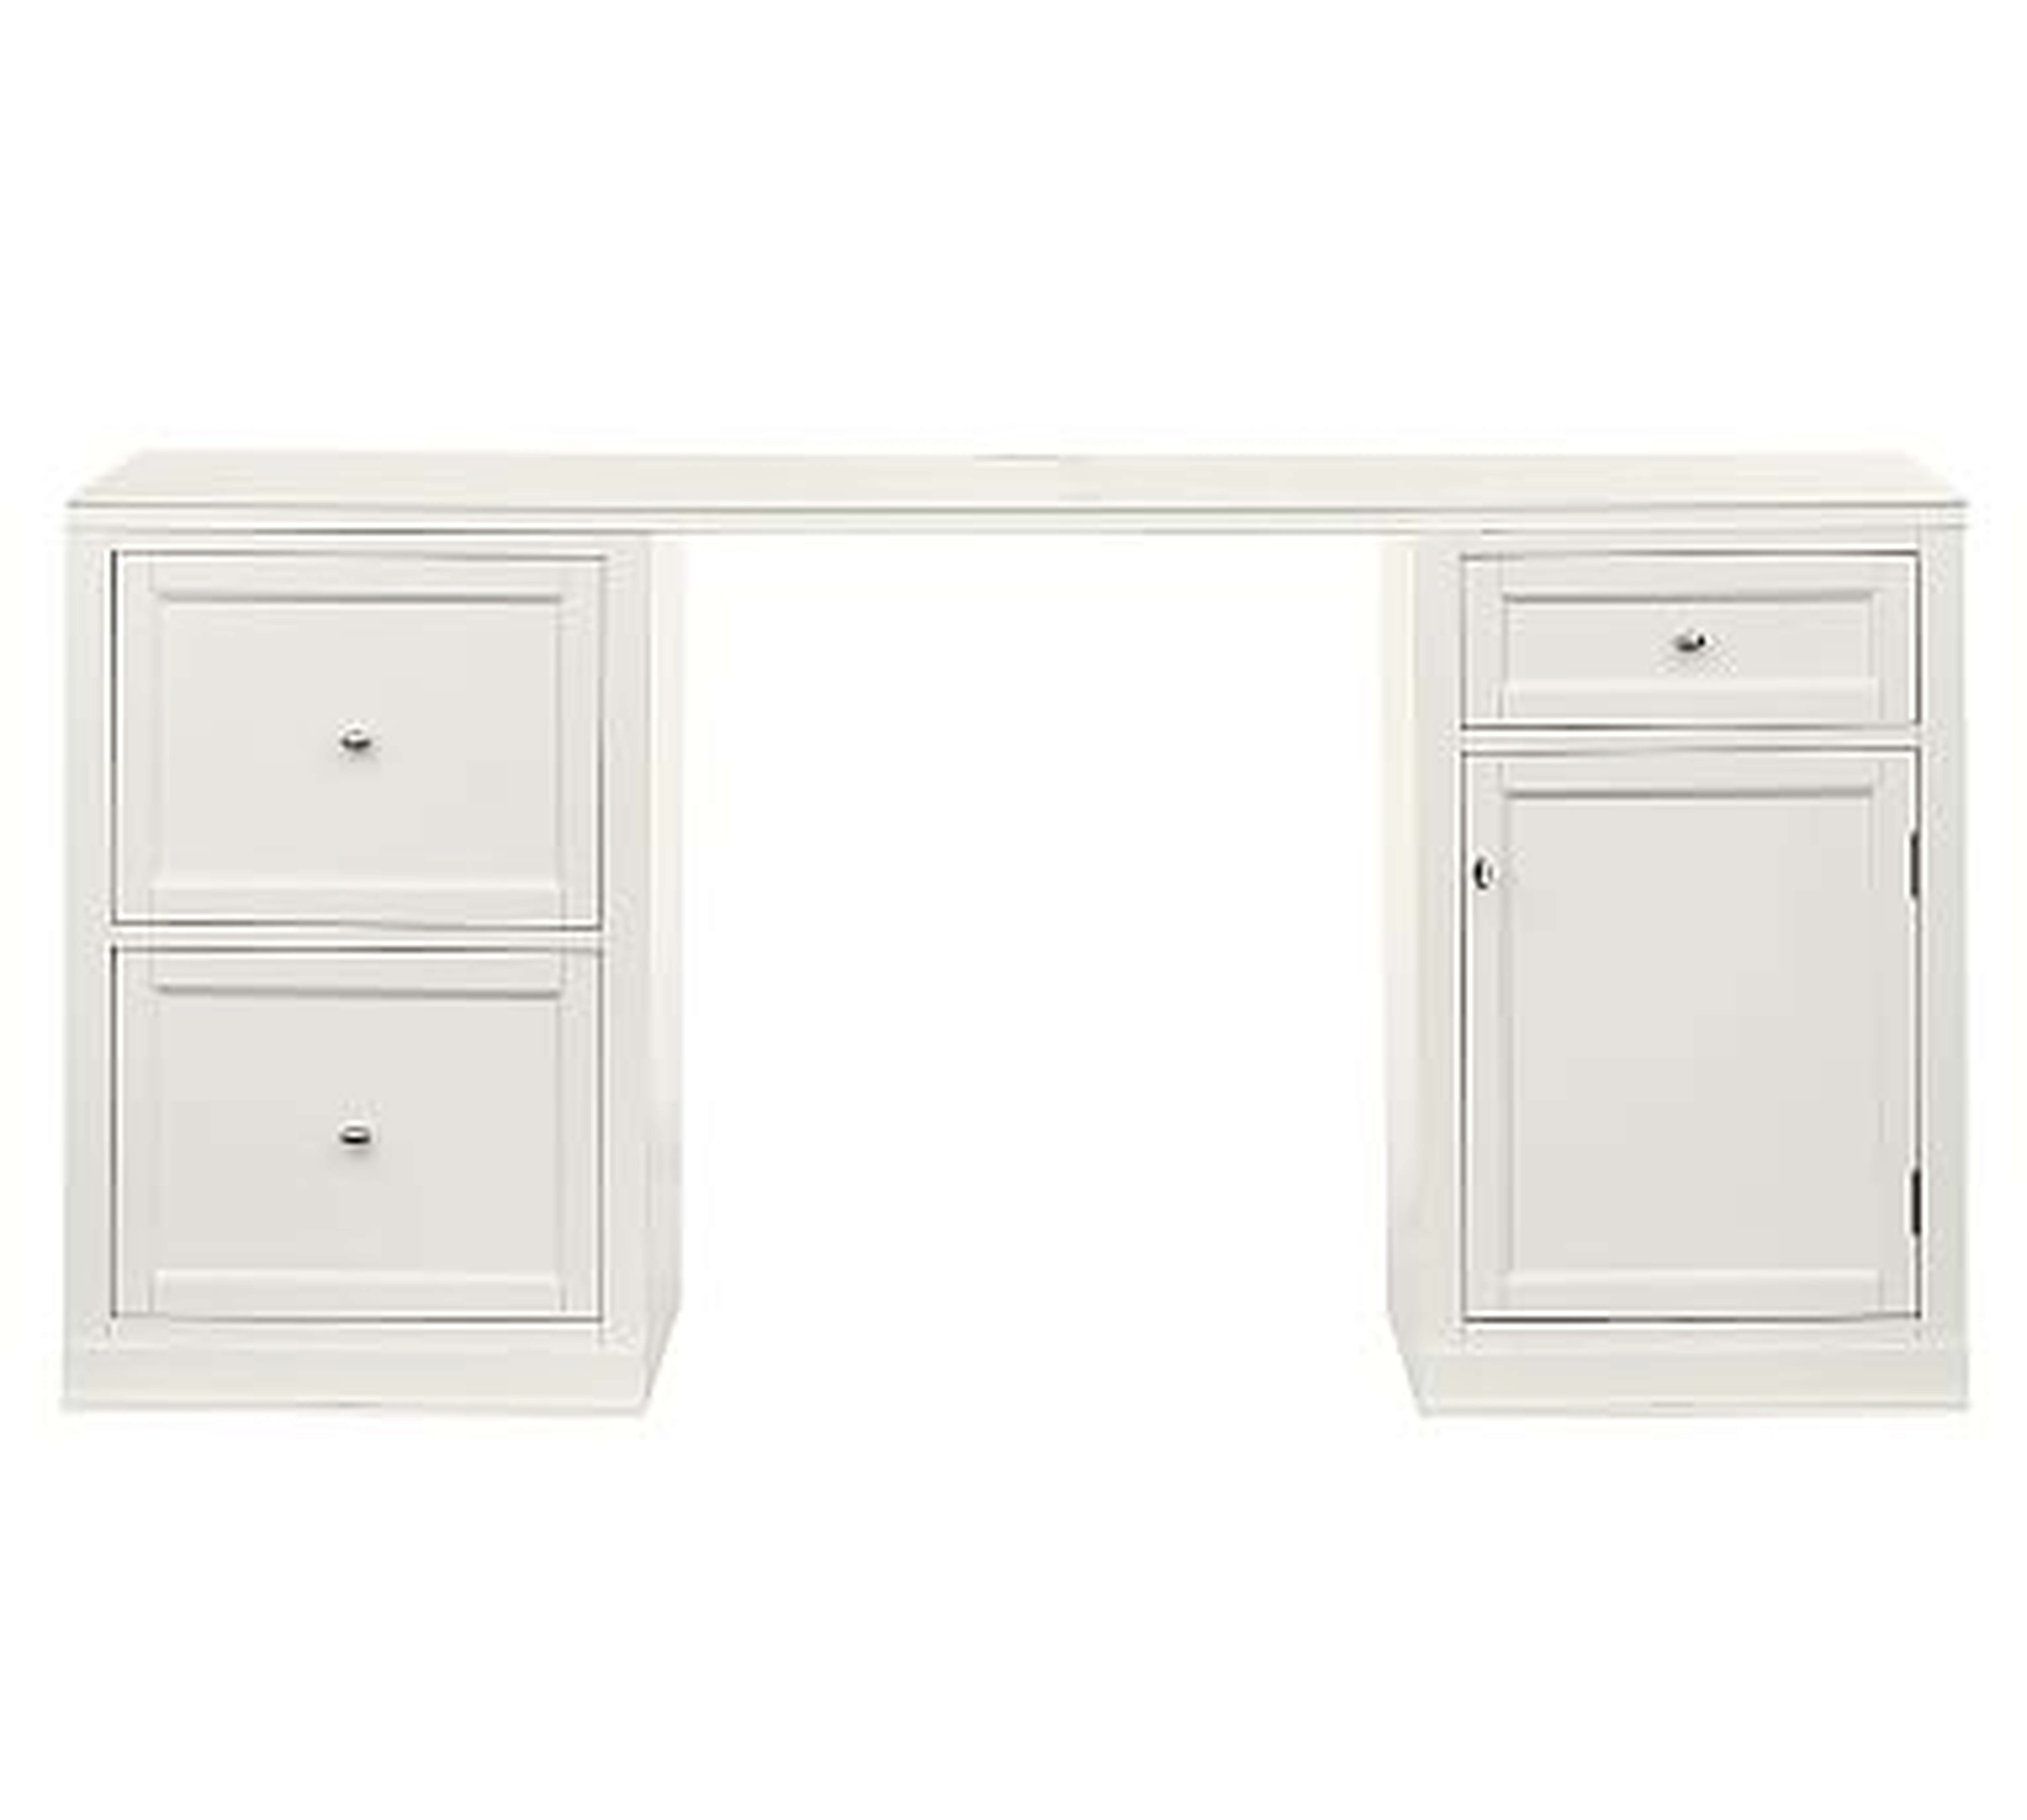 Logan 62" Desk with Drawers, Alabaster - Pottery Barn